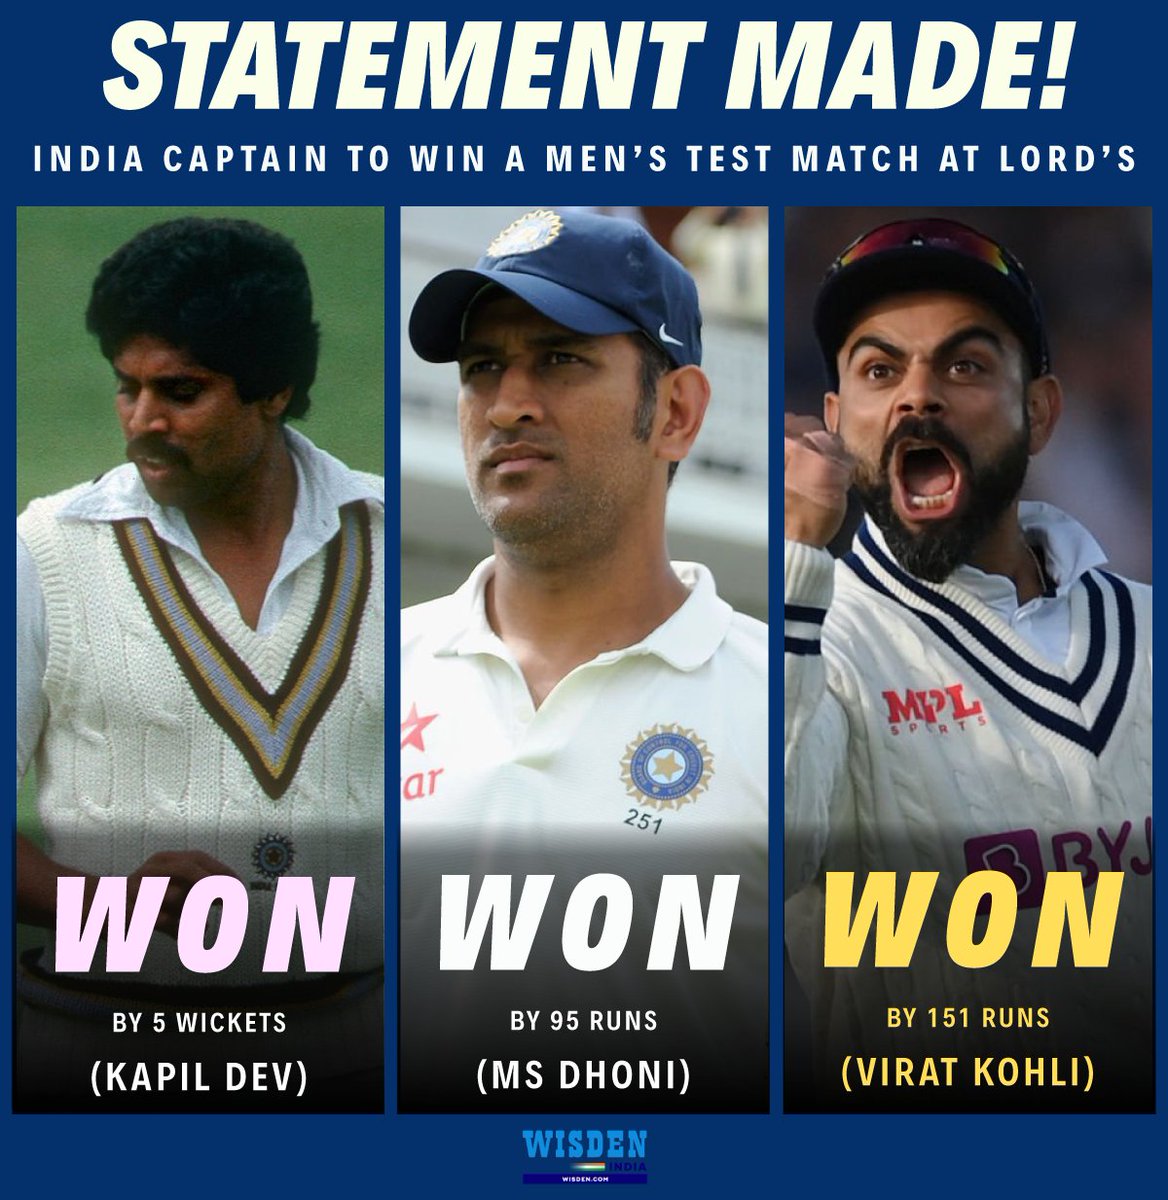 Kapil Dev - 1986 ✅
MS Dhoni - 2014✅
Virat Kohli - 2021✅

#OnThisDay in 2021, Virat Kohli became the third India captain to win a Test match at Lord's 🔥👏

India defeated England by 151 runs and registered a historic victory 👏

#ViratKohli #India #ENGvsIND #Cricket #Tests